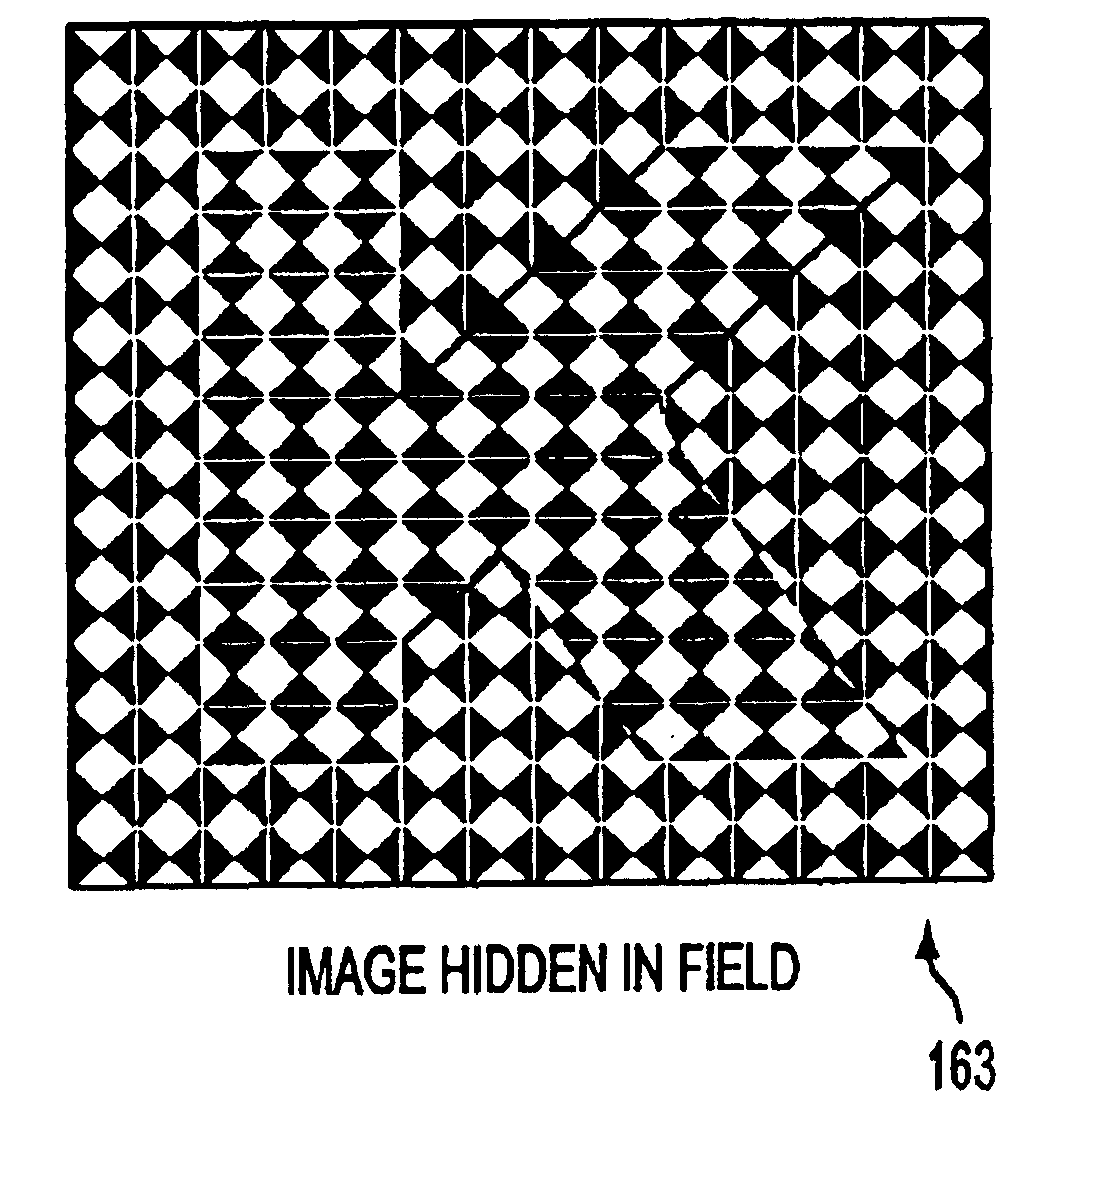 System and method for encoding and decoding an image or document and document encoded thereby